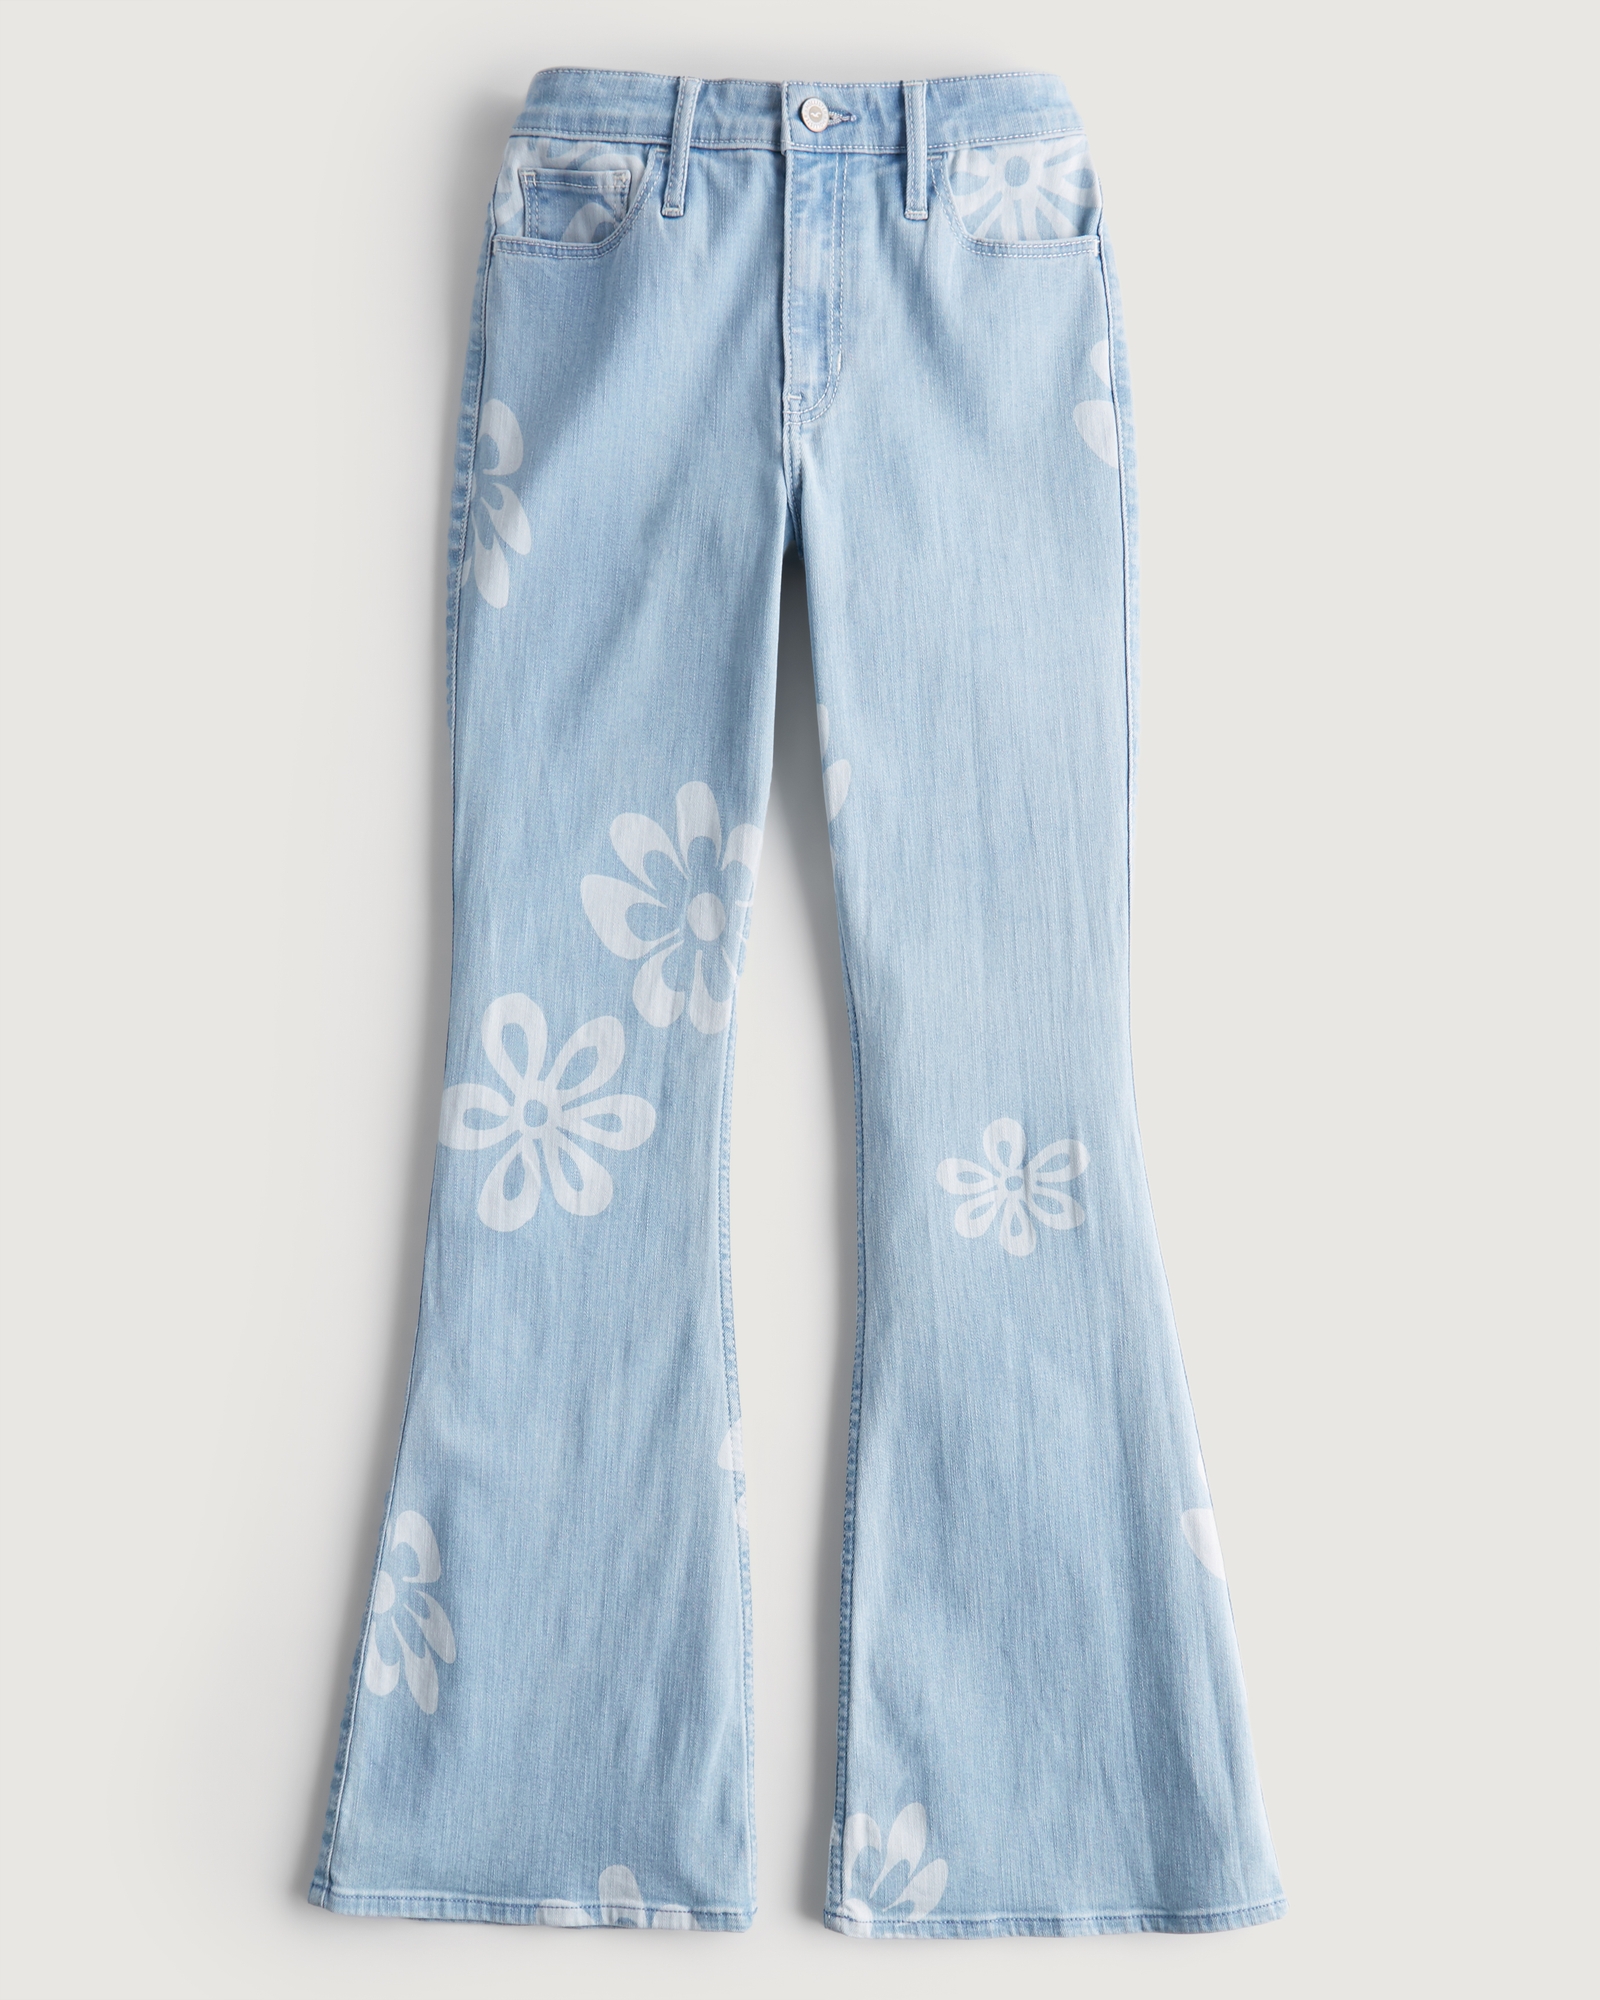 high waist flare jeans! Hollister jeans! Flares have